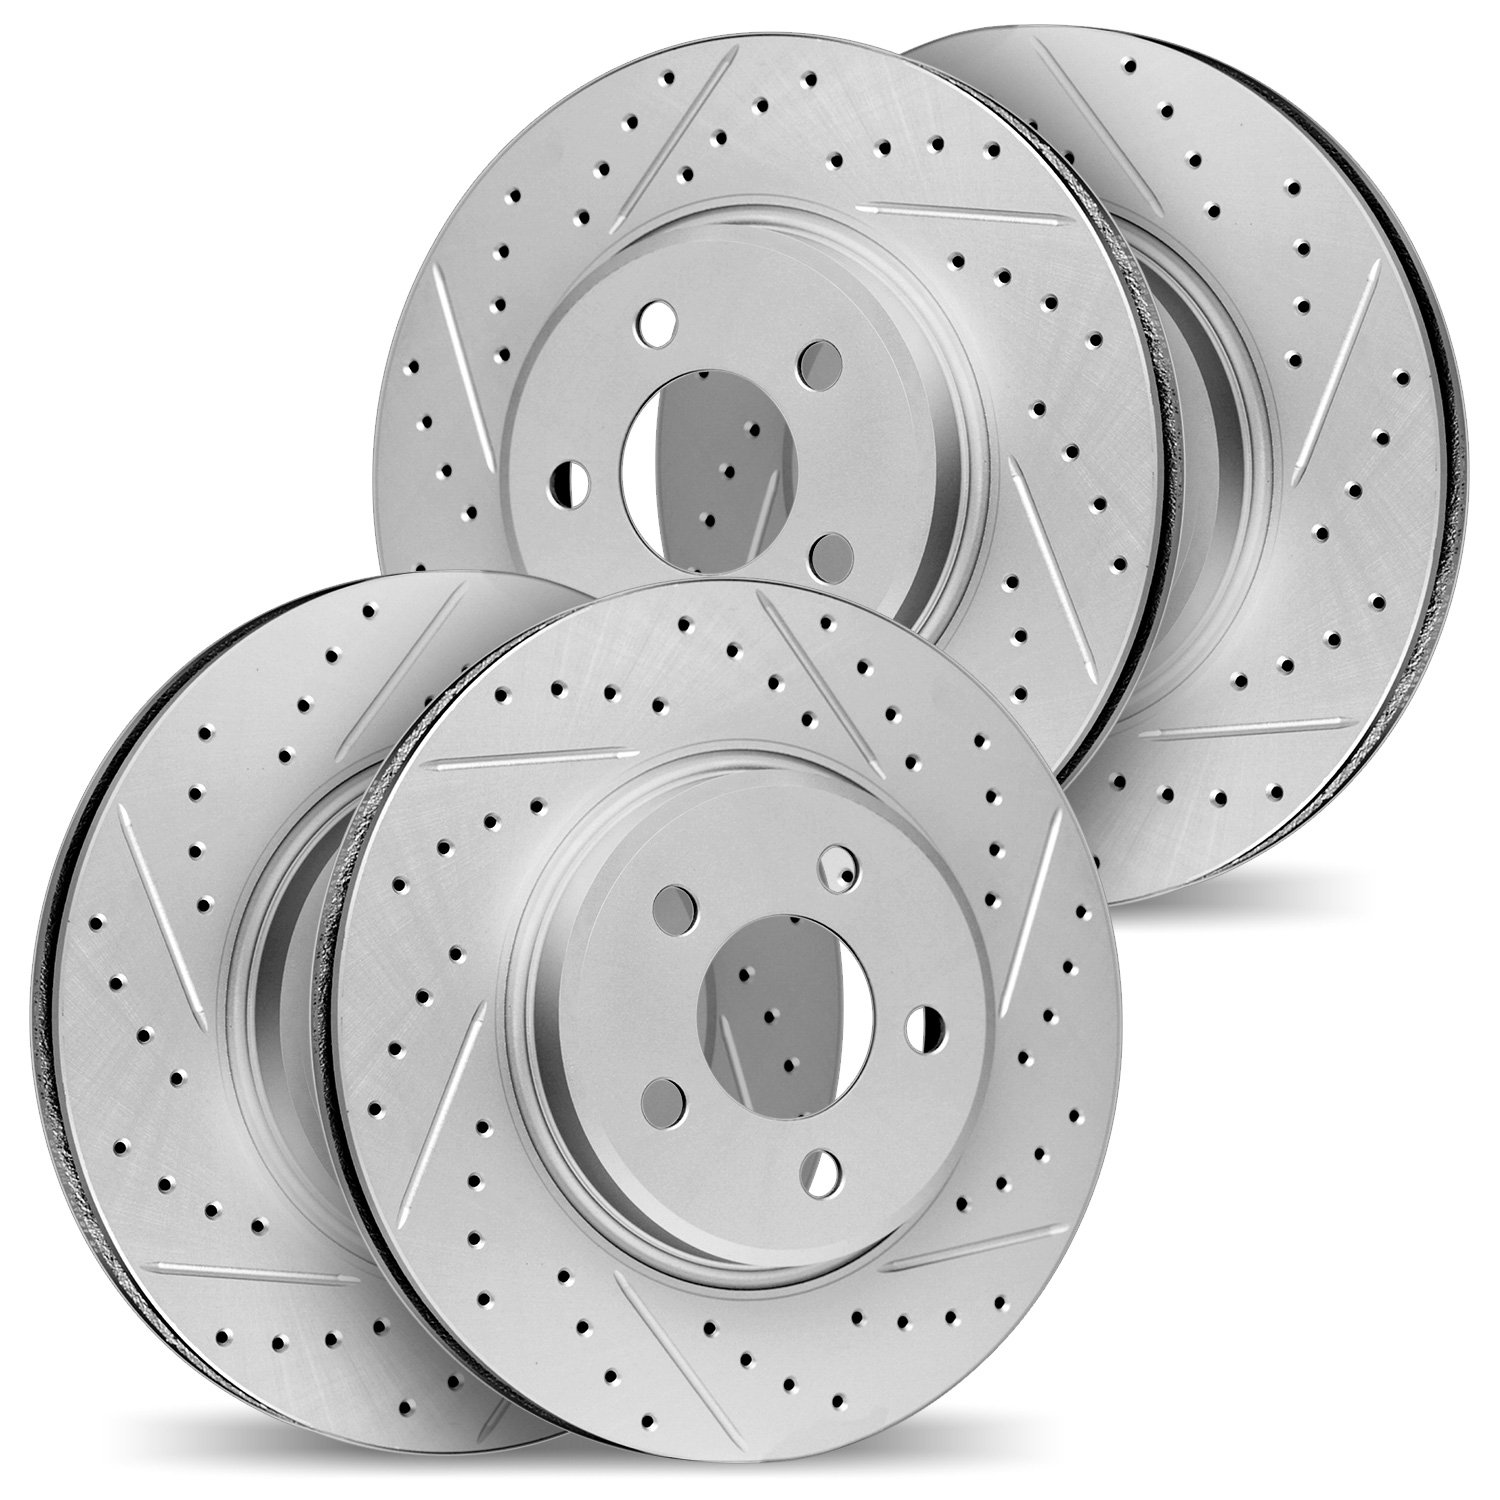 2004-13004 Geoperformance Drilled/Slotted Brake Rotors, 2006-2014 Subaru, Position: Front and Rear